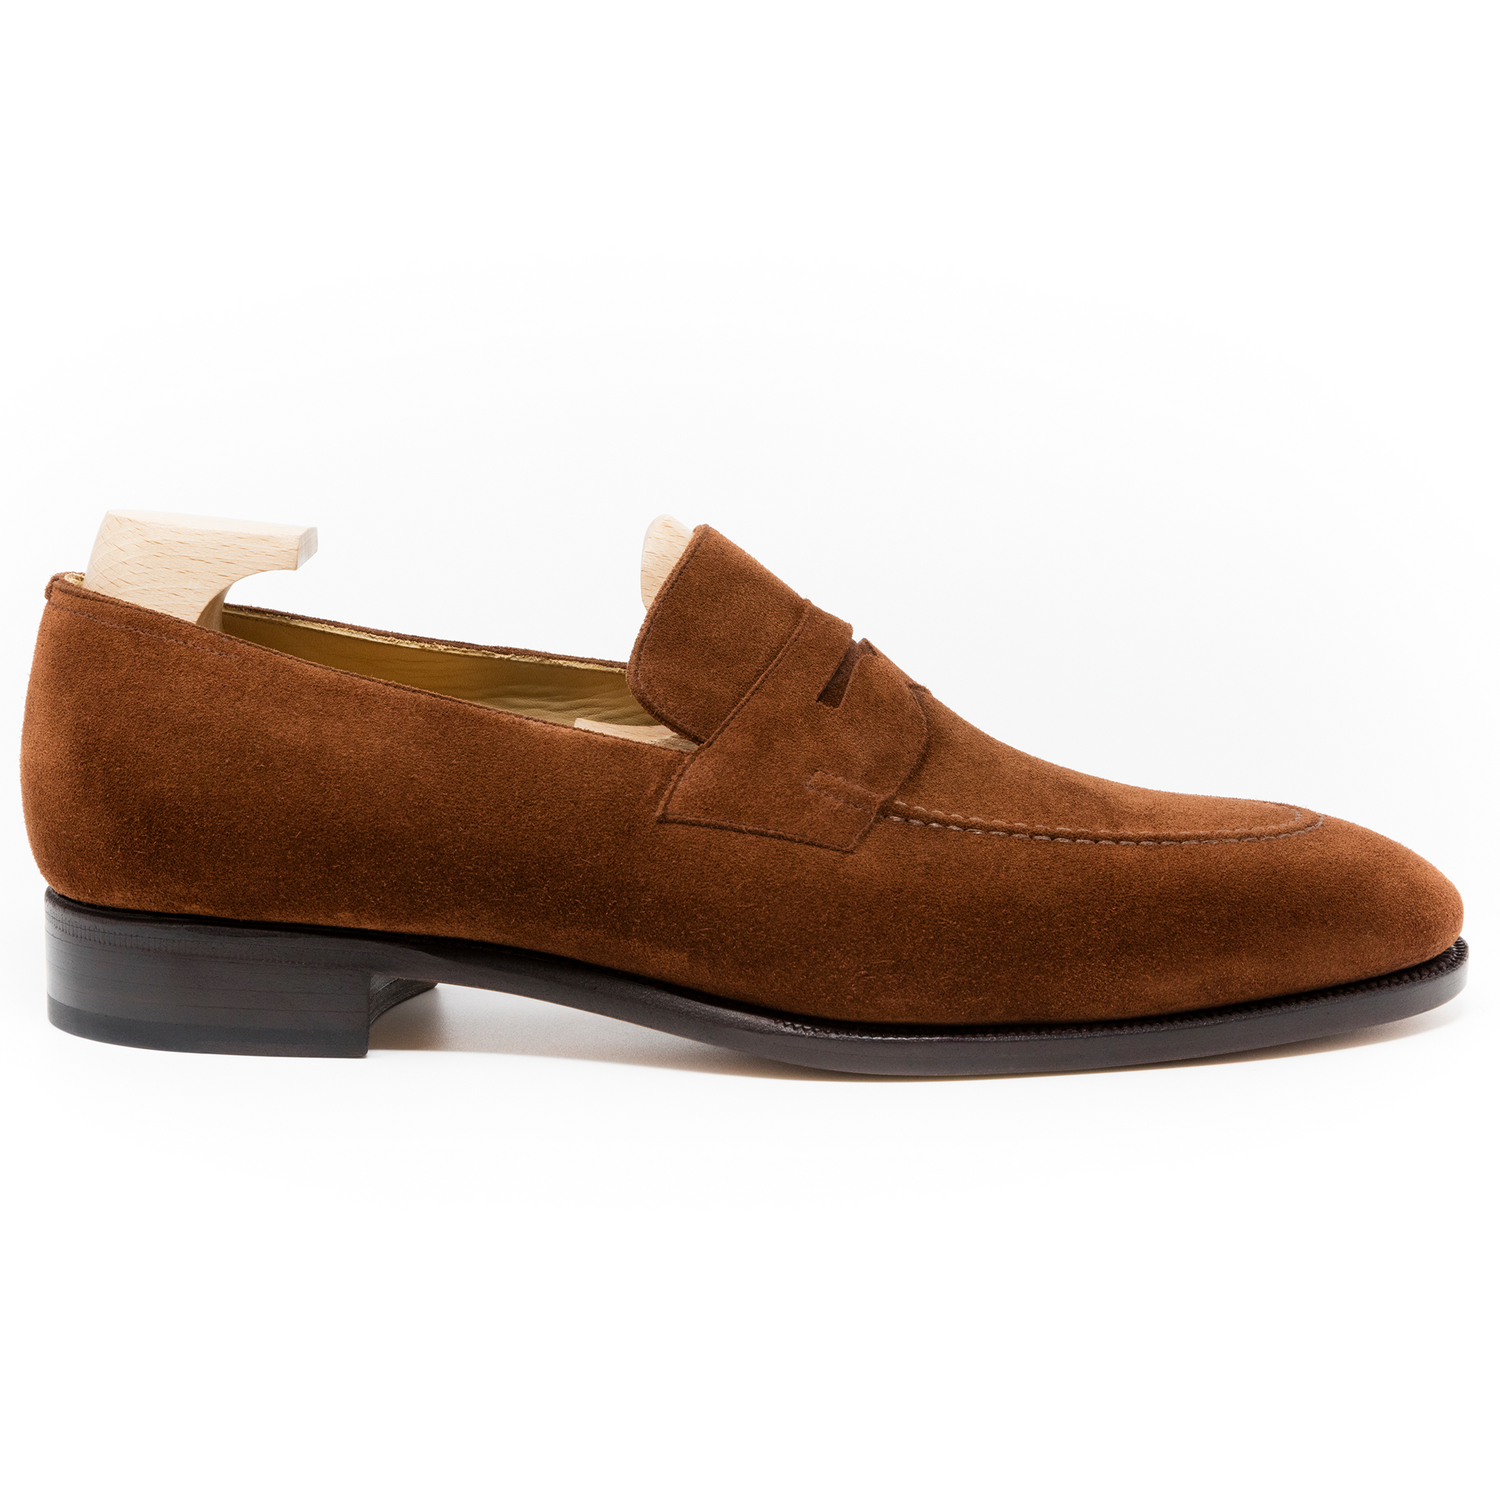 TLB Mallorca leather shoes 117 / GOYA / SUEDE POLO BROWN